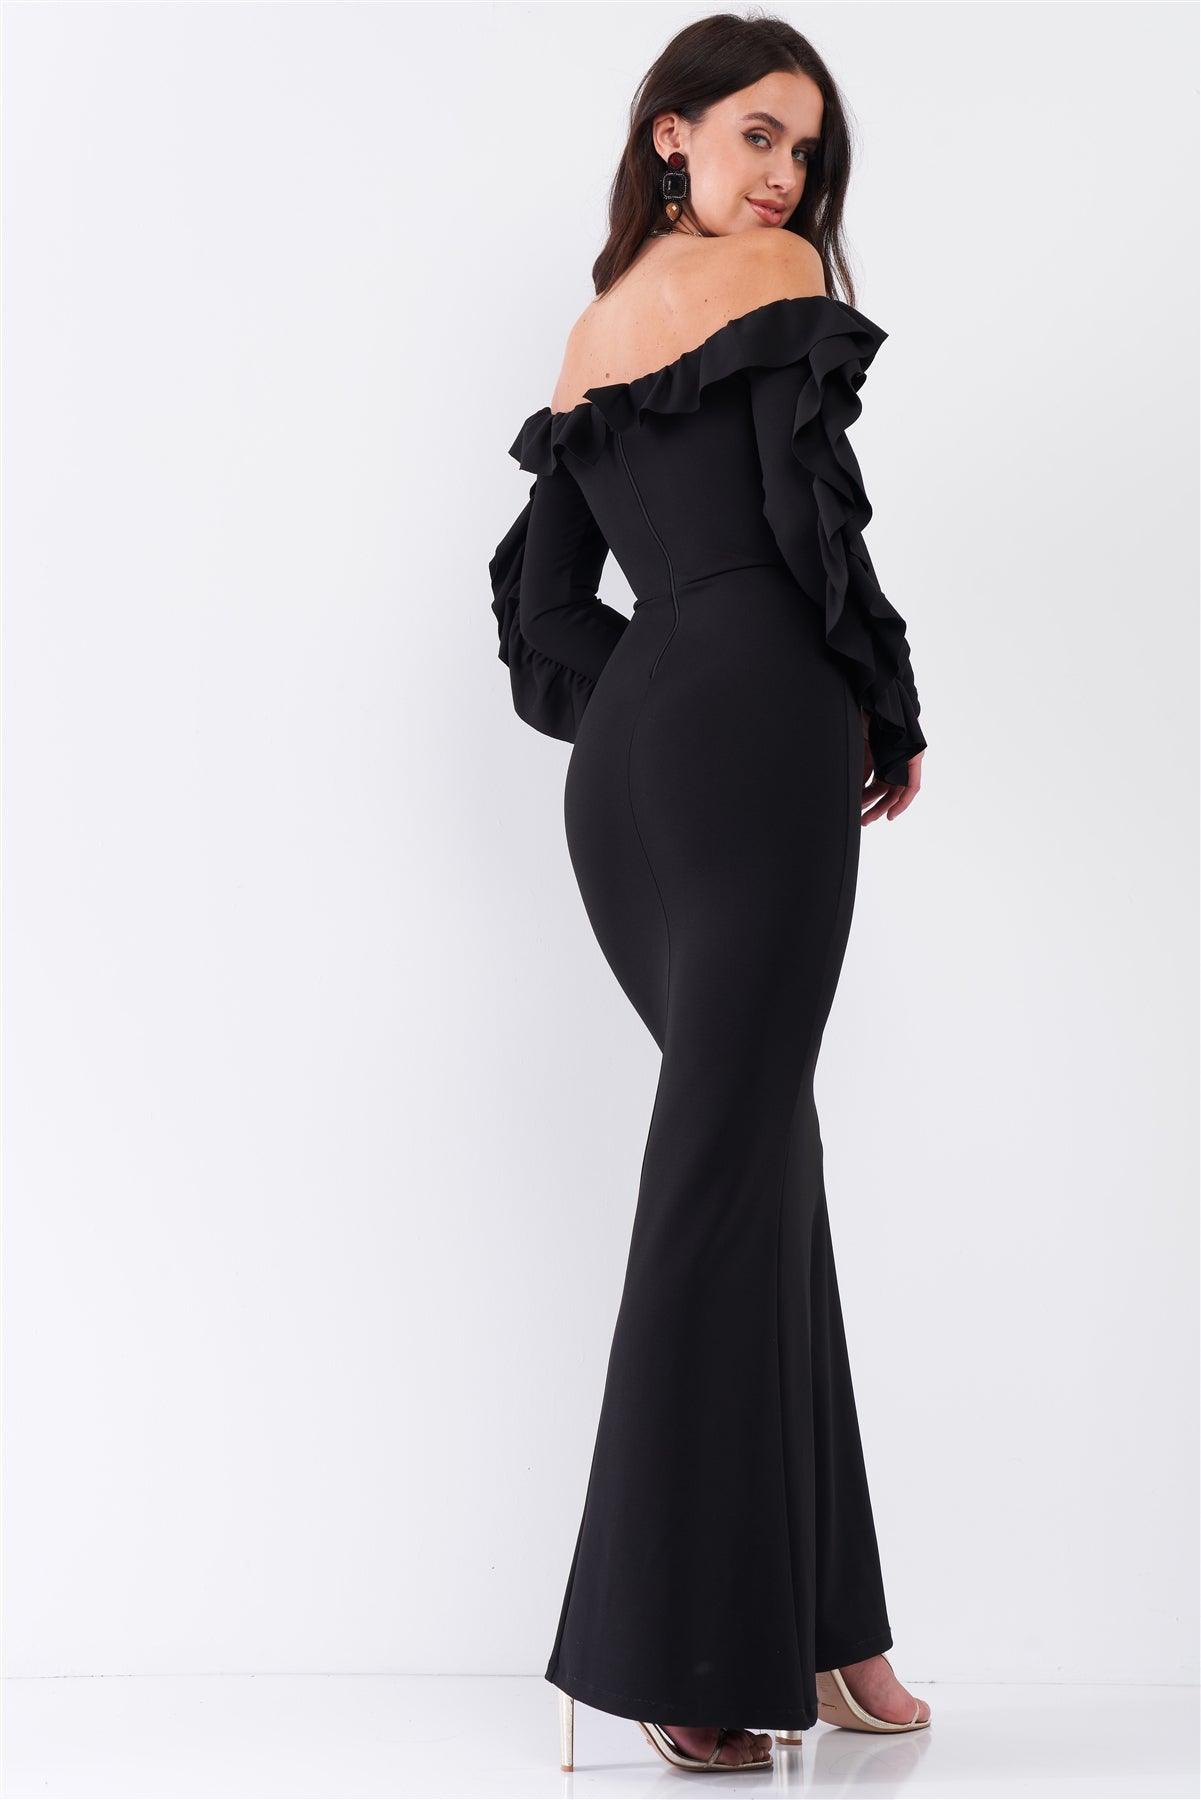 Black Off-The-Shoulder Ruffle Trim Detail Long Sleeve Fitted Maxi Dress /2-2-2